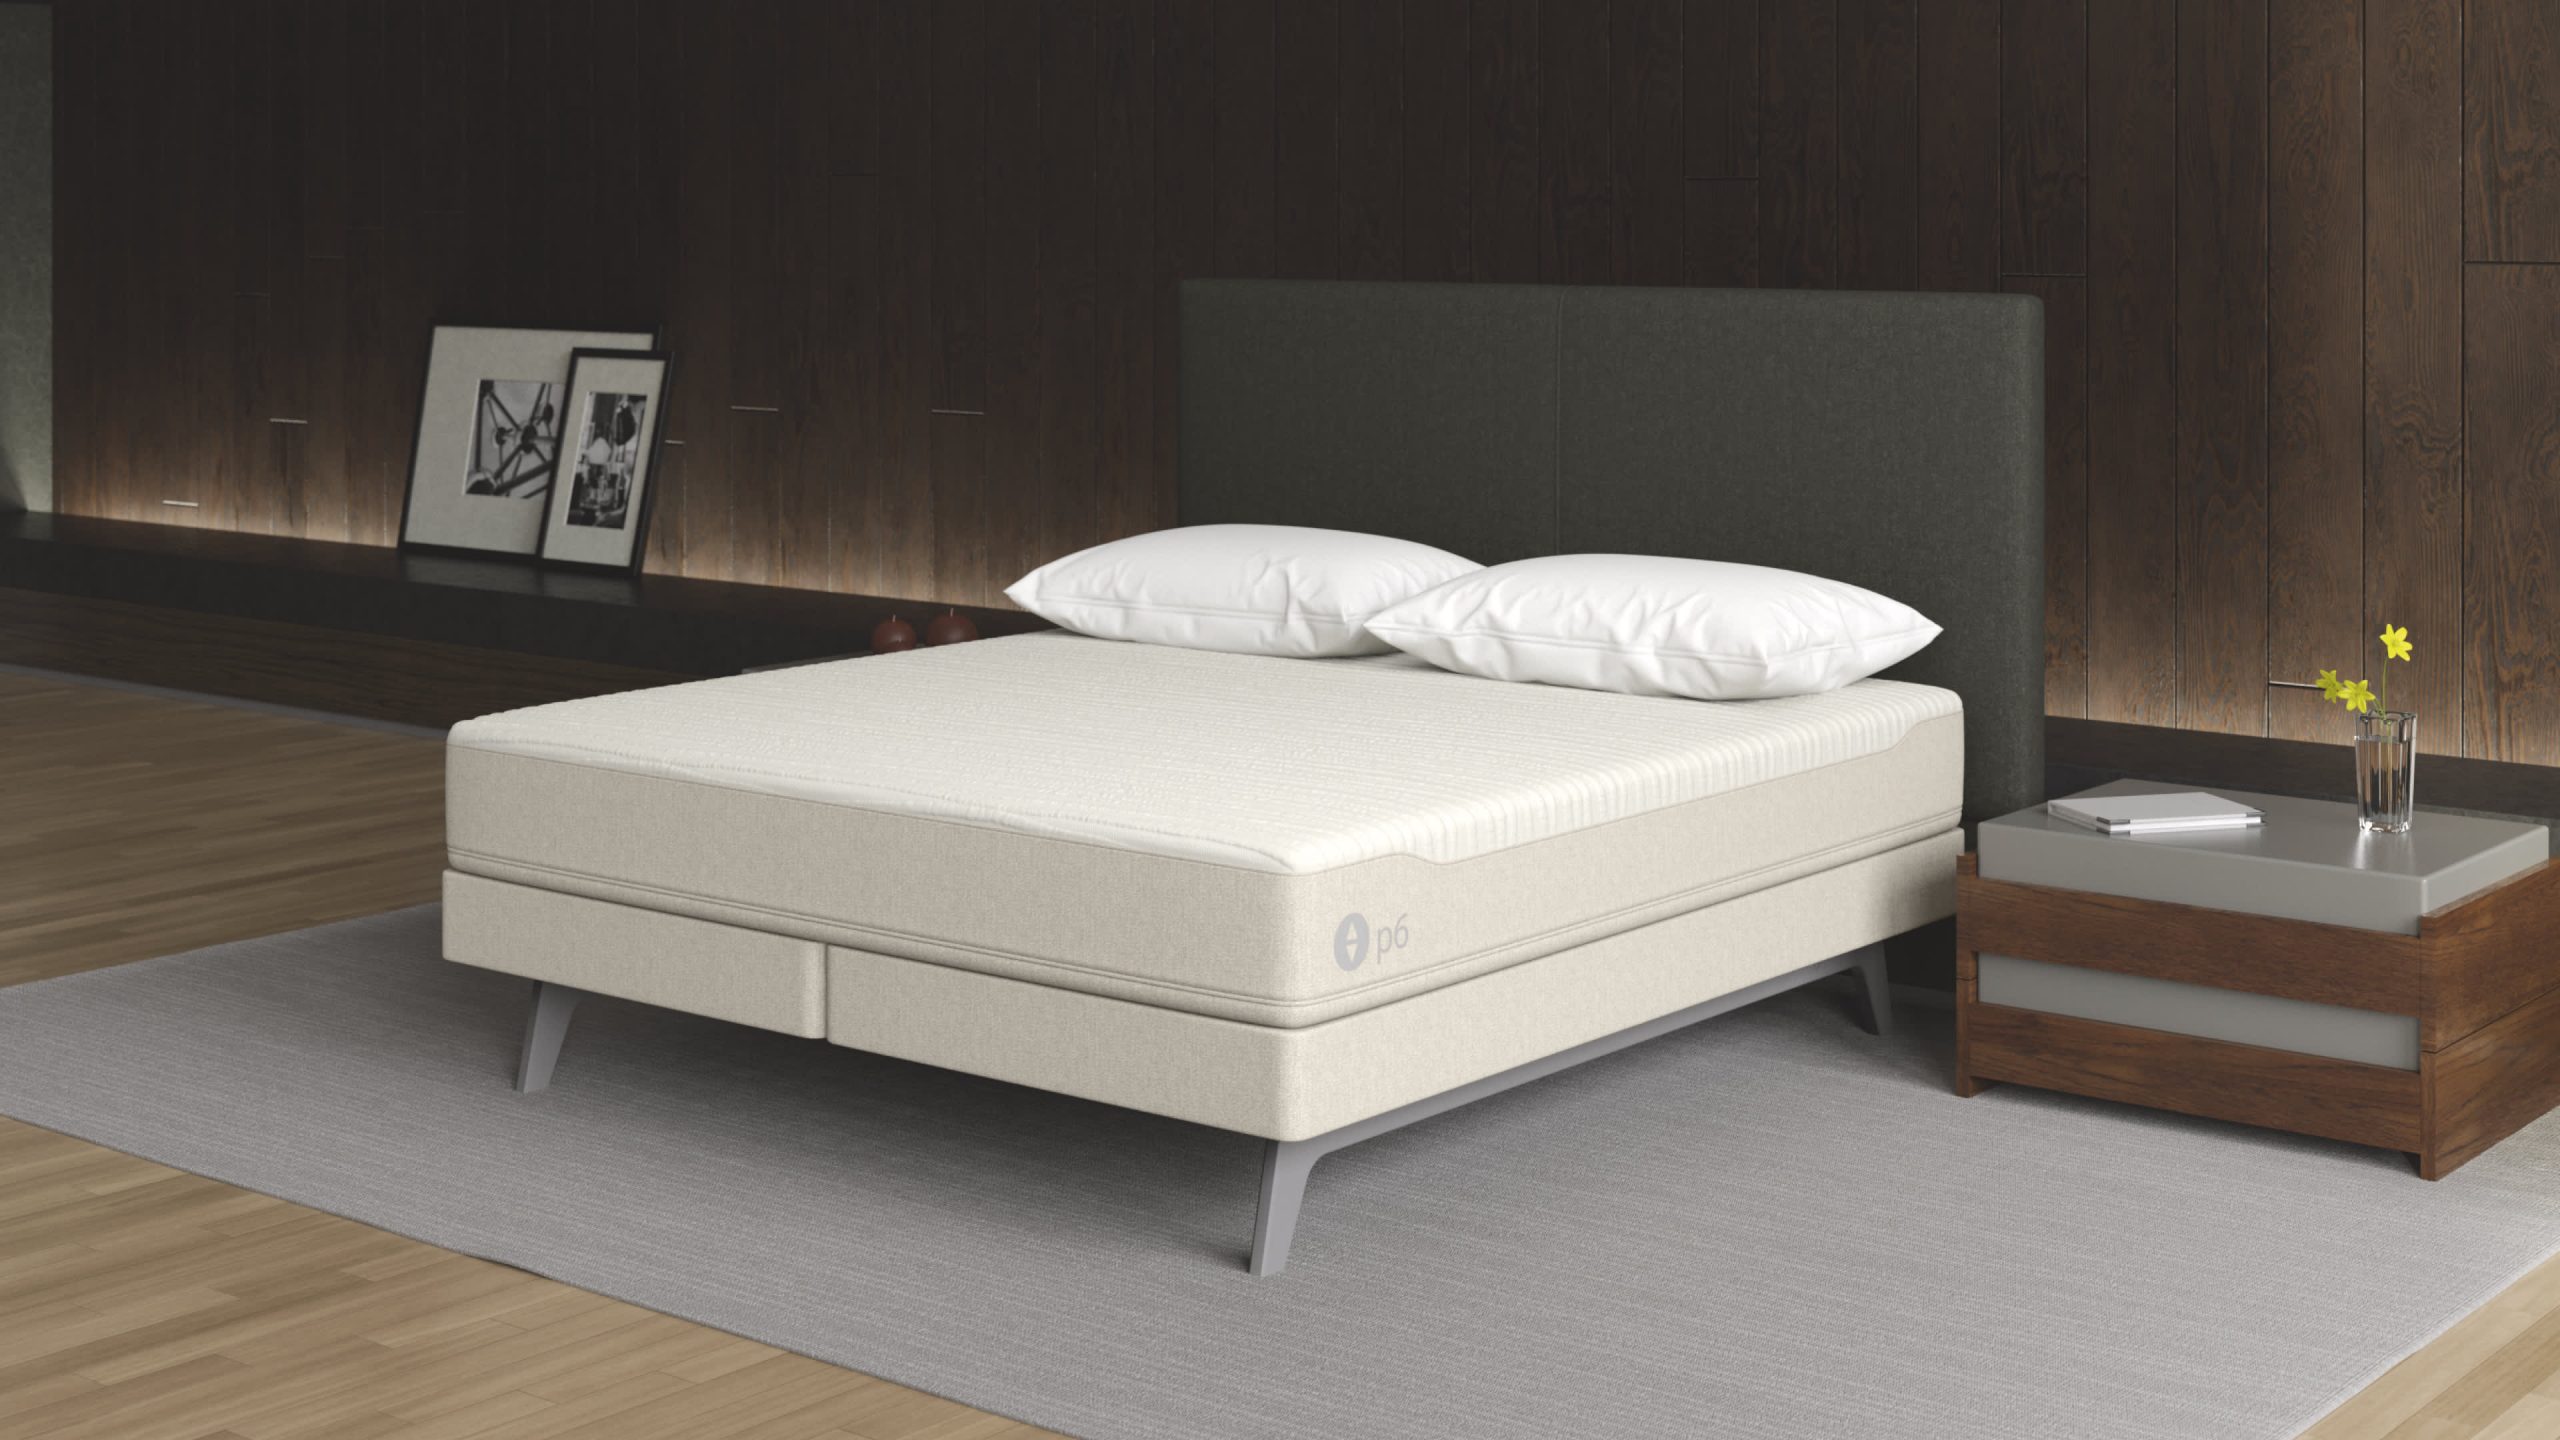 Sleep Number 360 Smart Bed Overview, What Is A Sleep Number Smart Bed